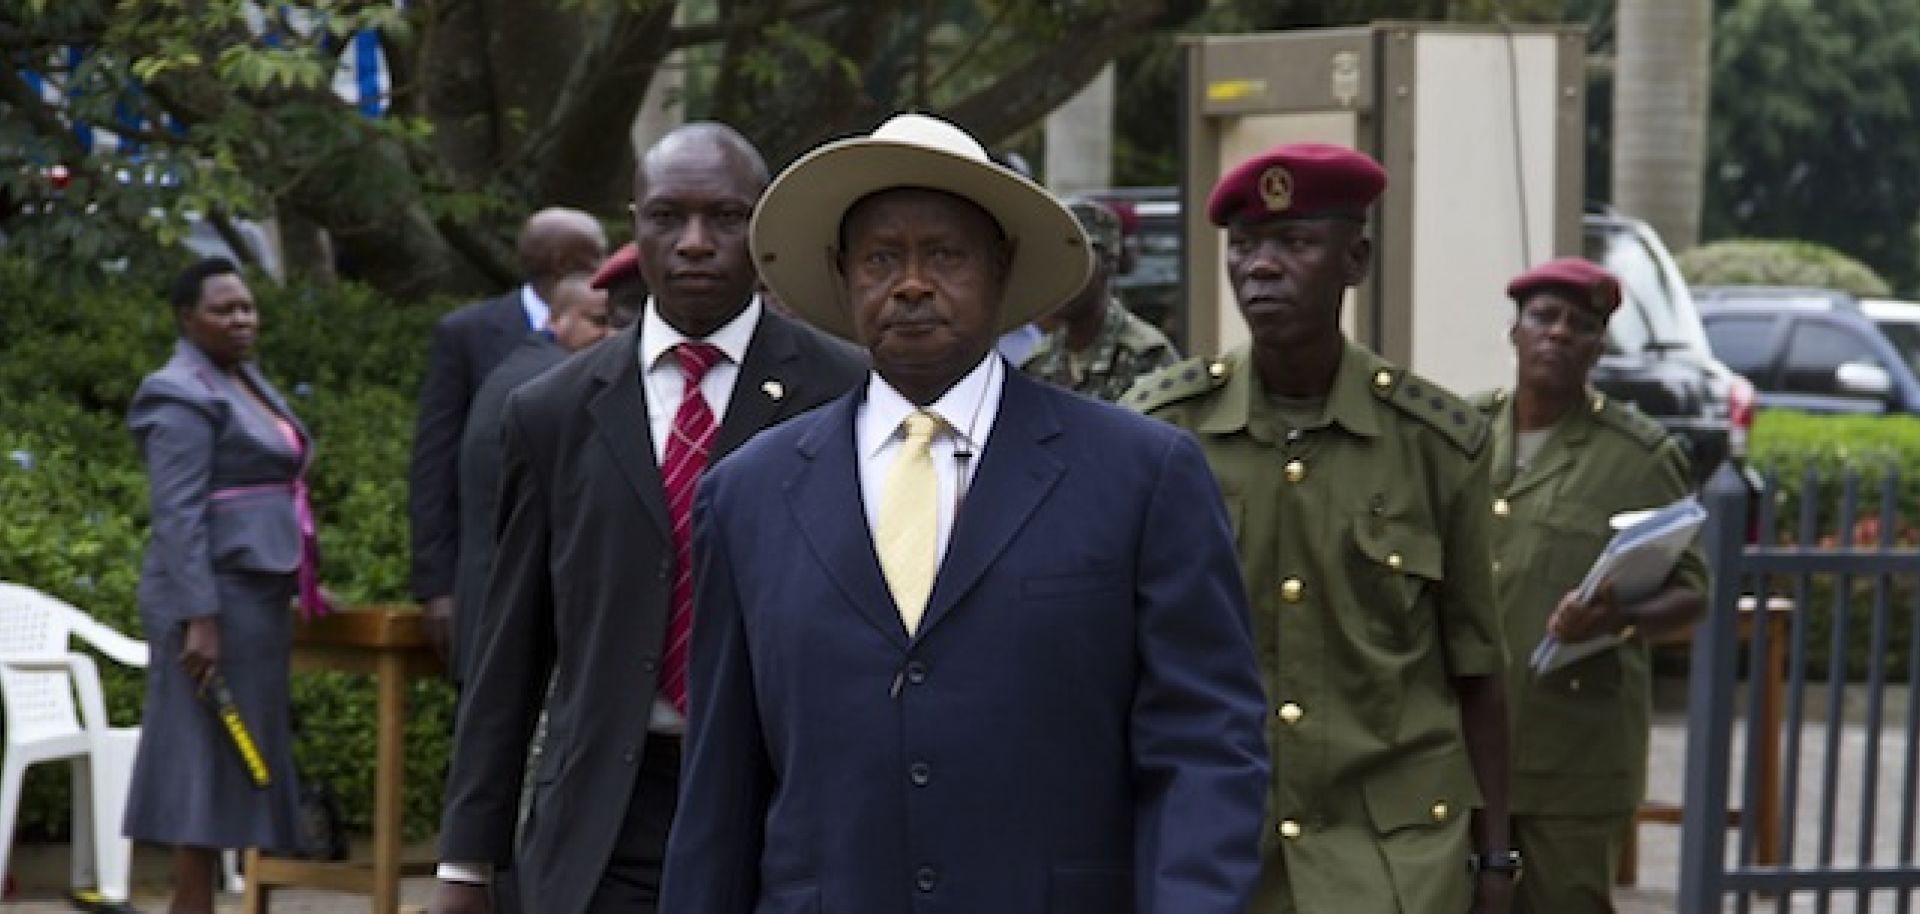 Uganda's President Yoweri Museveni (C) arrives at Munyonyo resort Hotel in Kampala on Nov. 30, to attend the 15th Ordinary Summit of the East African Community Heads of State.